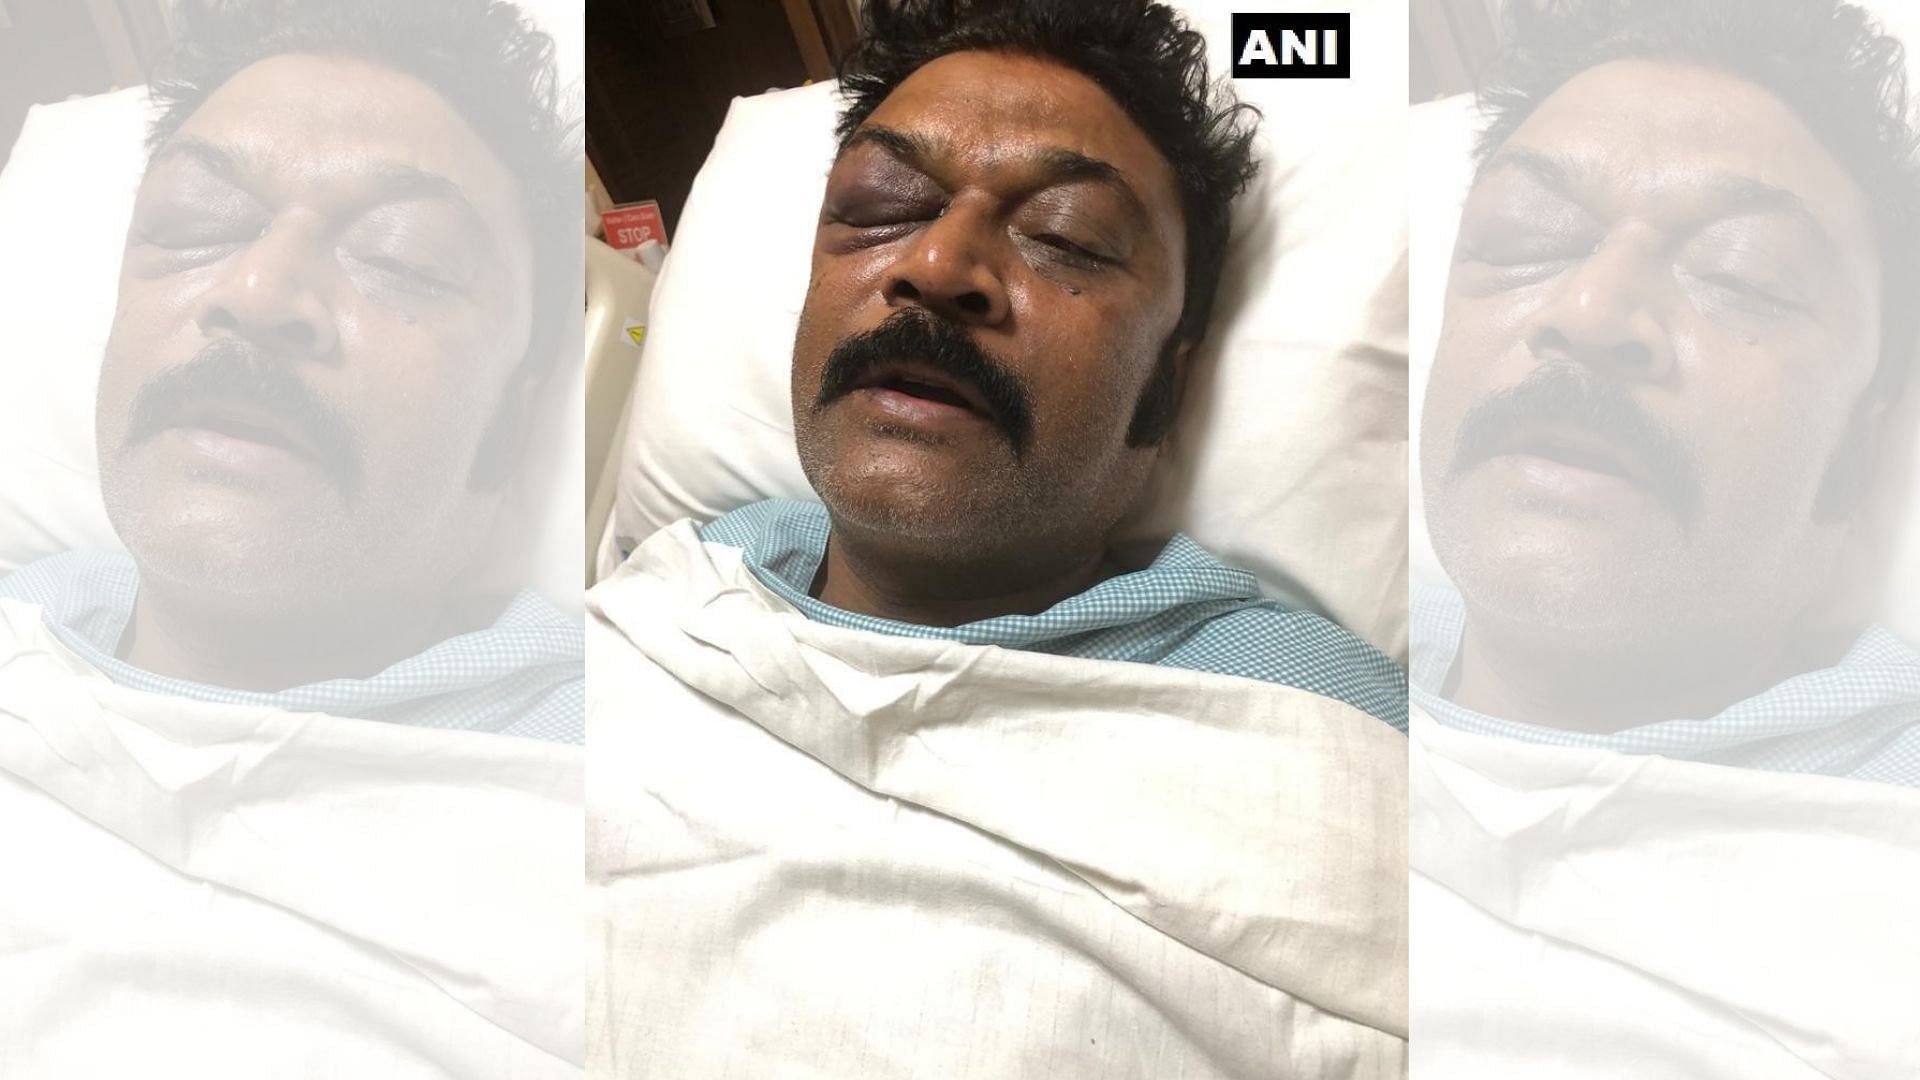 Congress MLA Anand Singh injured in the brawl being treated at Apollo hospital.